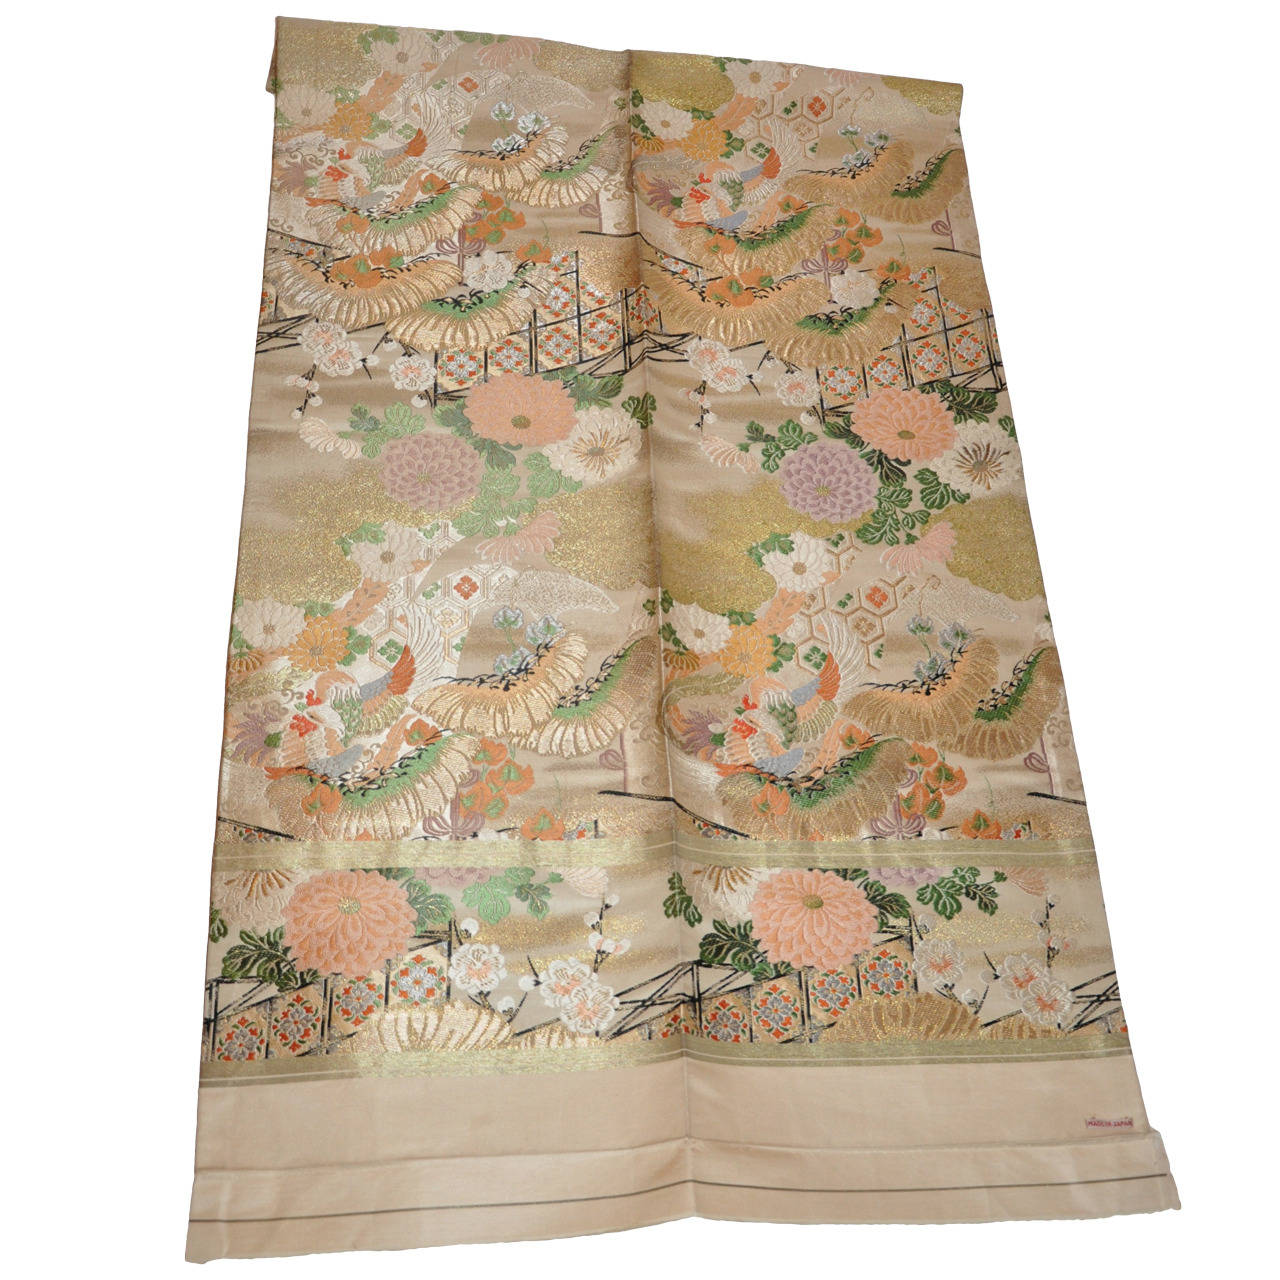 Vintage Japanese Texile Hand-Woven with Metallic Gold Threads